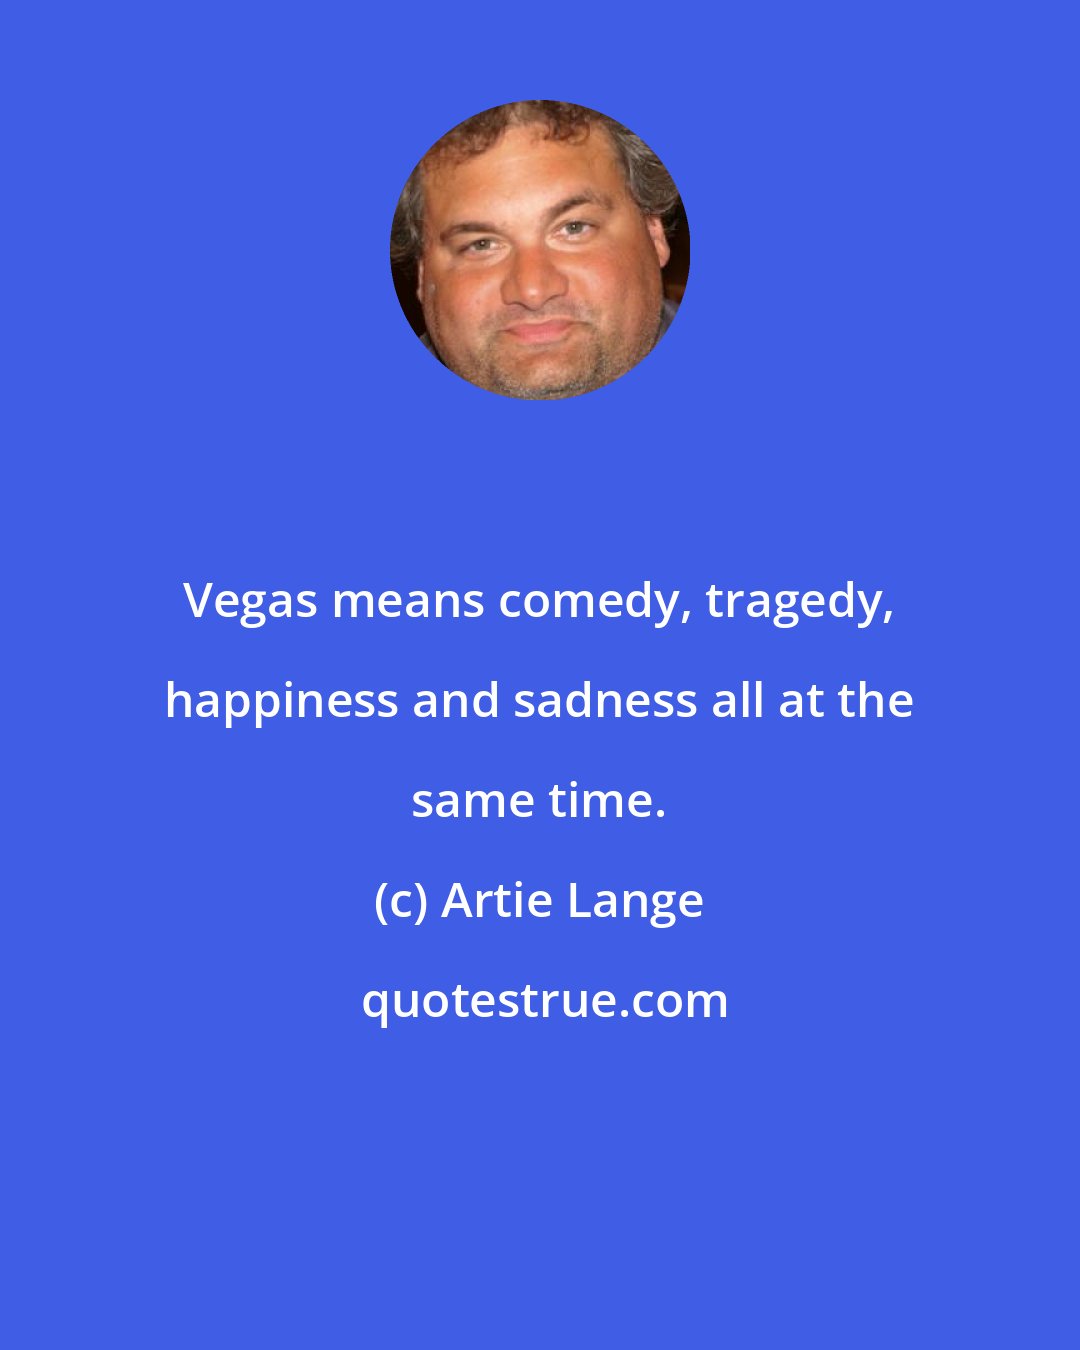 Artie Lange: Vegas means comedy, tragedy, happiness and sadness all at the same time.